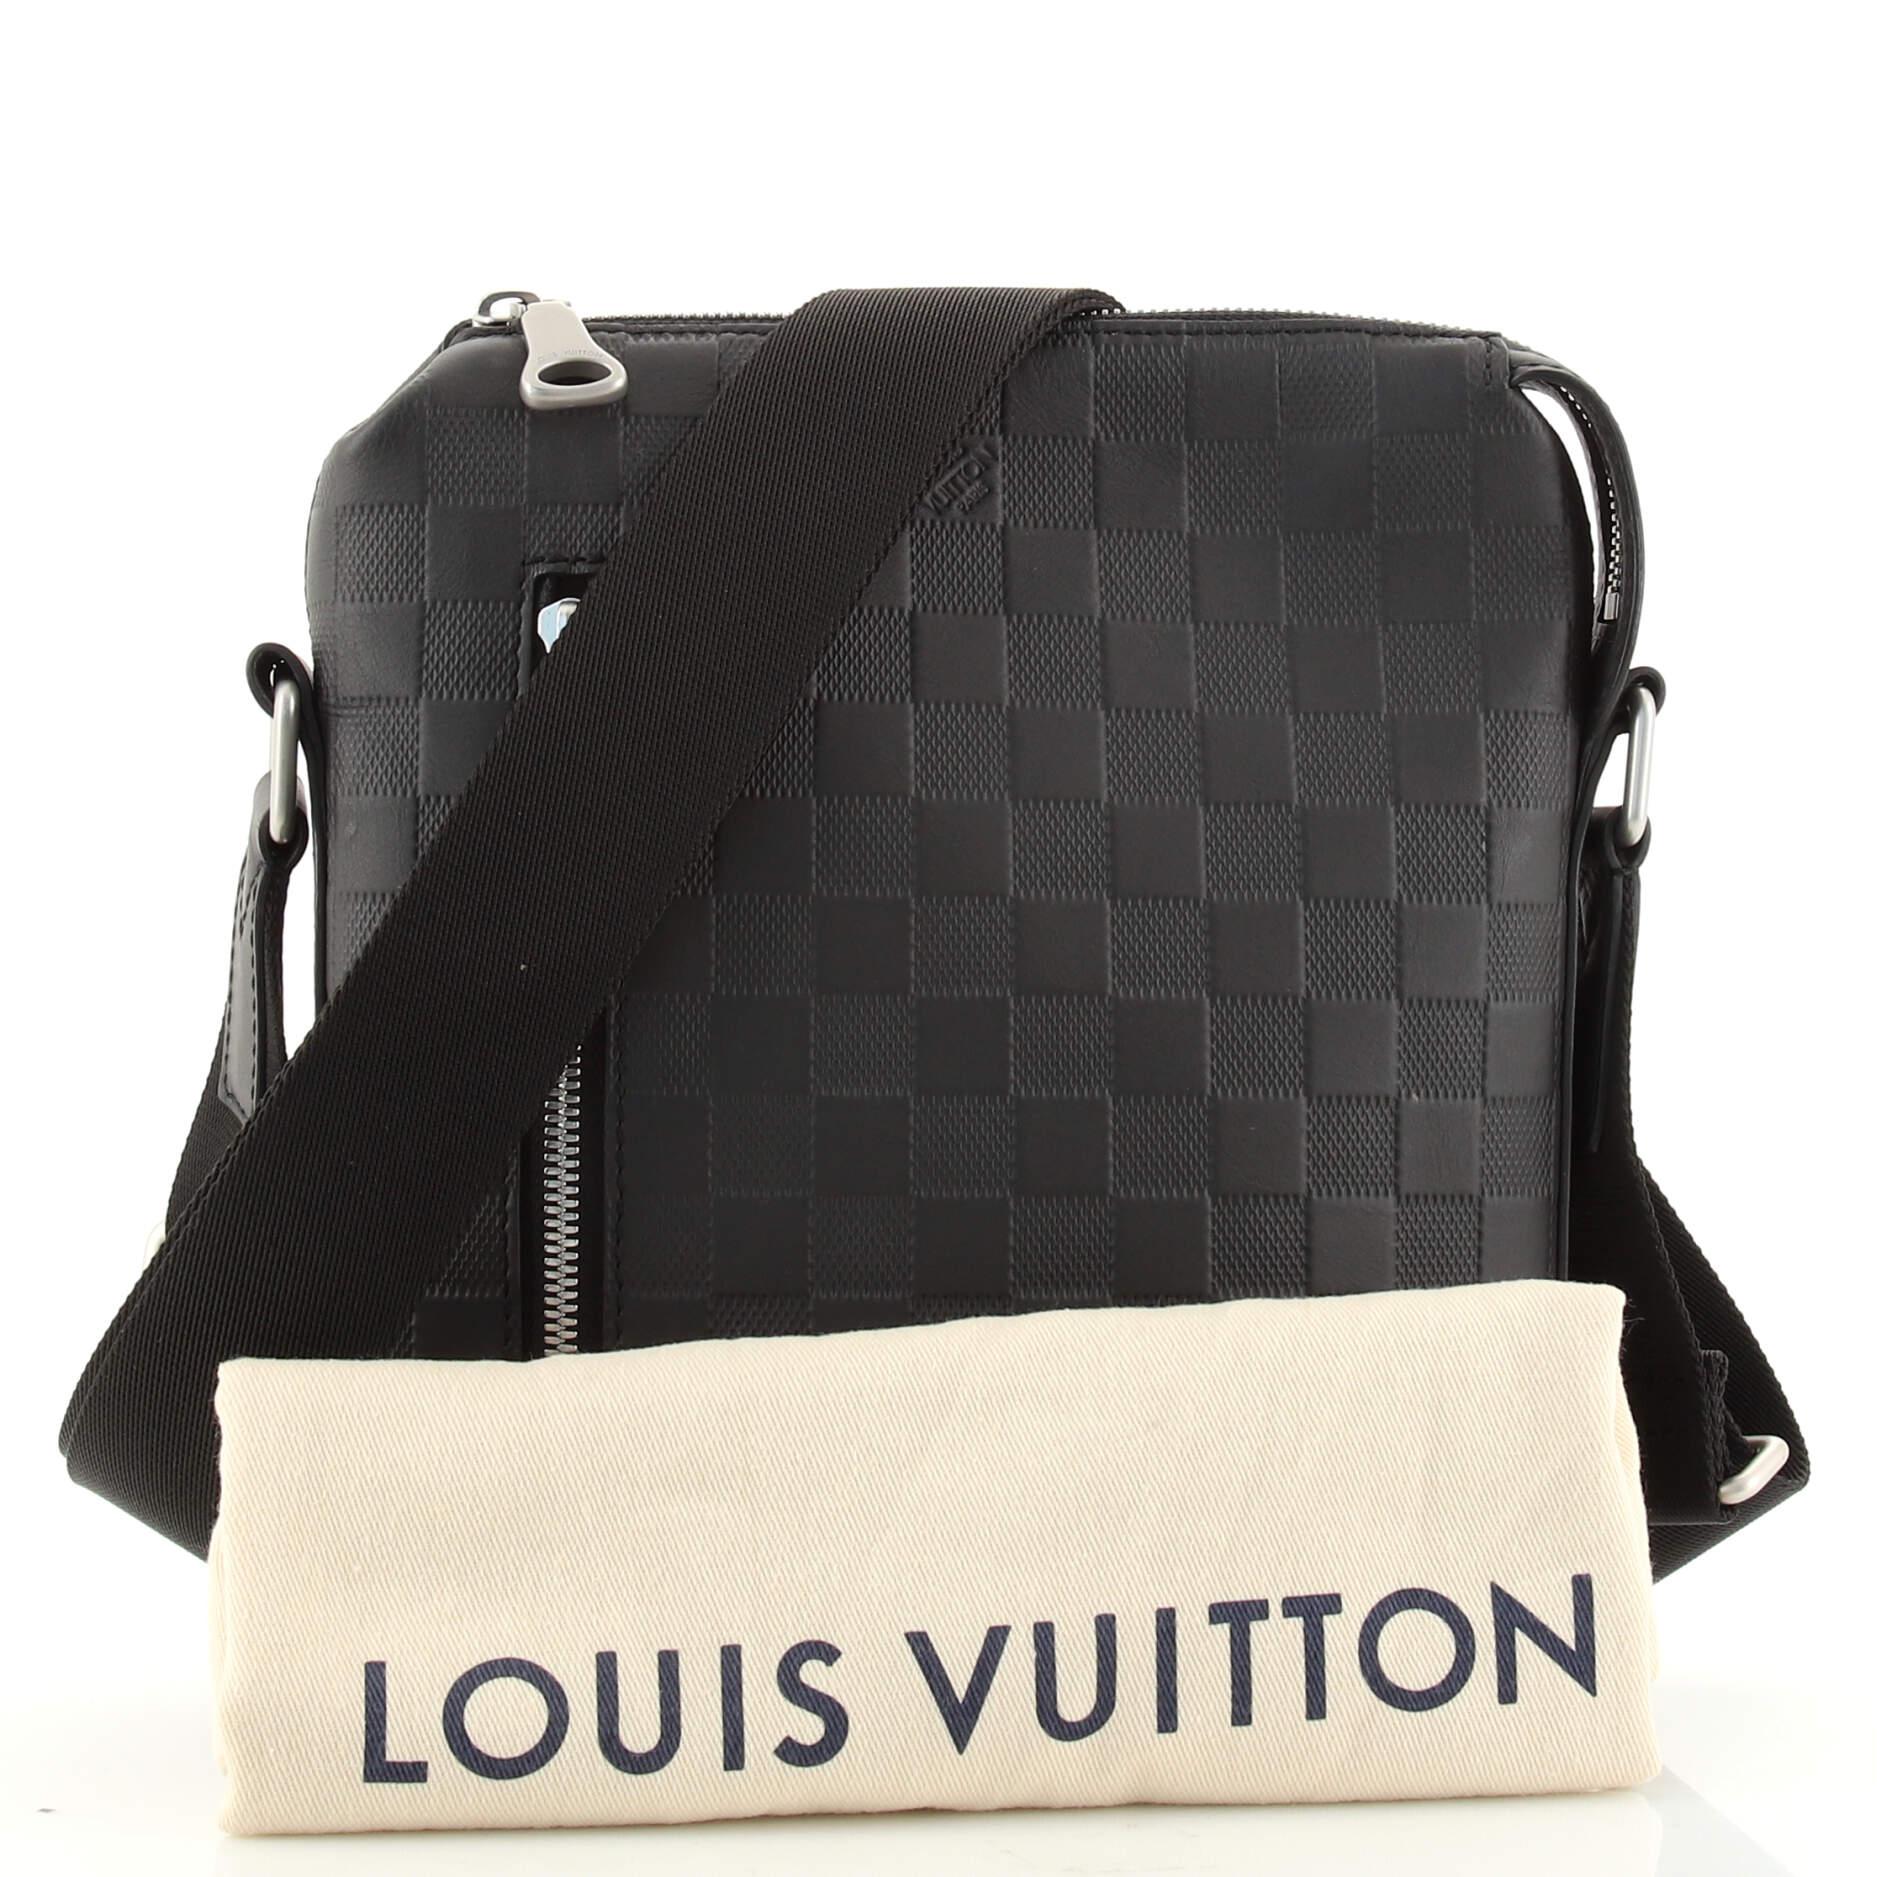 Authenticated Louis Vuitton Damier Infini Discovery Messenger BB Brown